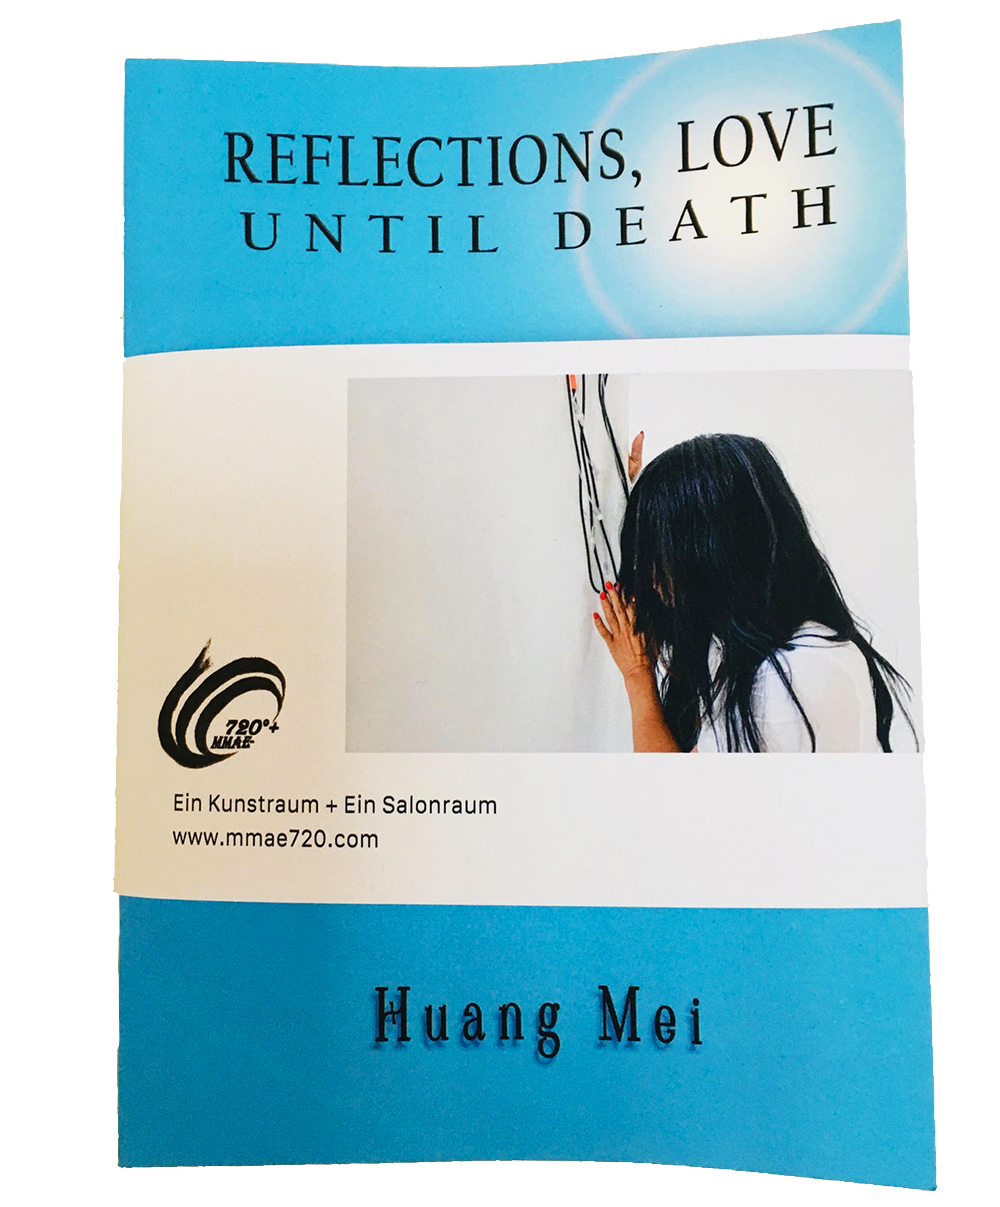 Reflections, Love until Death